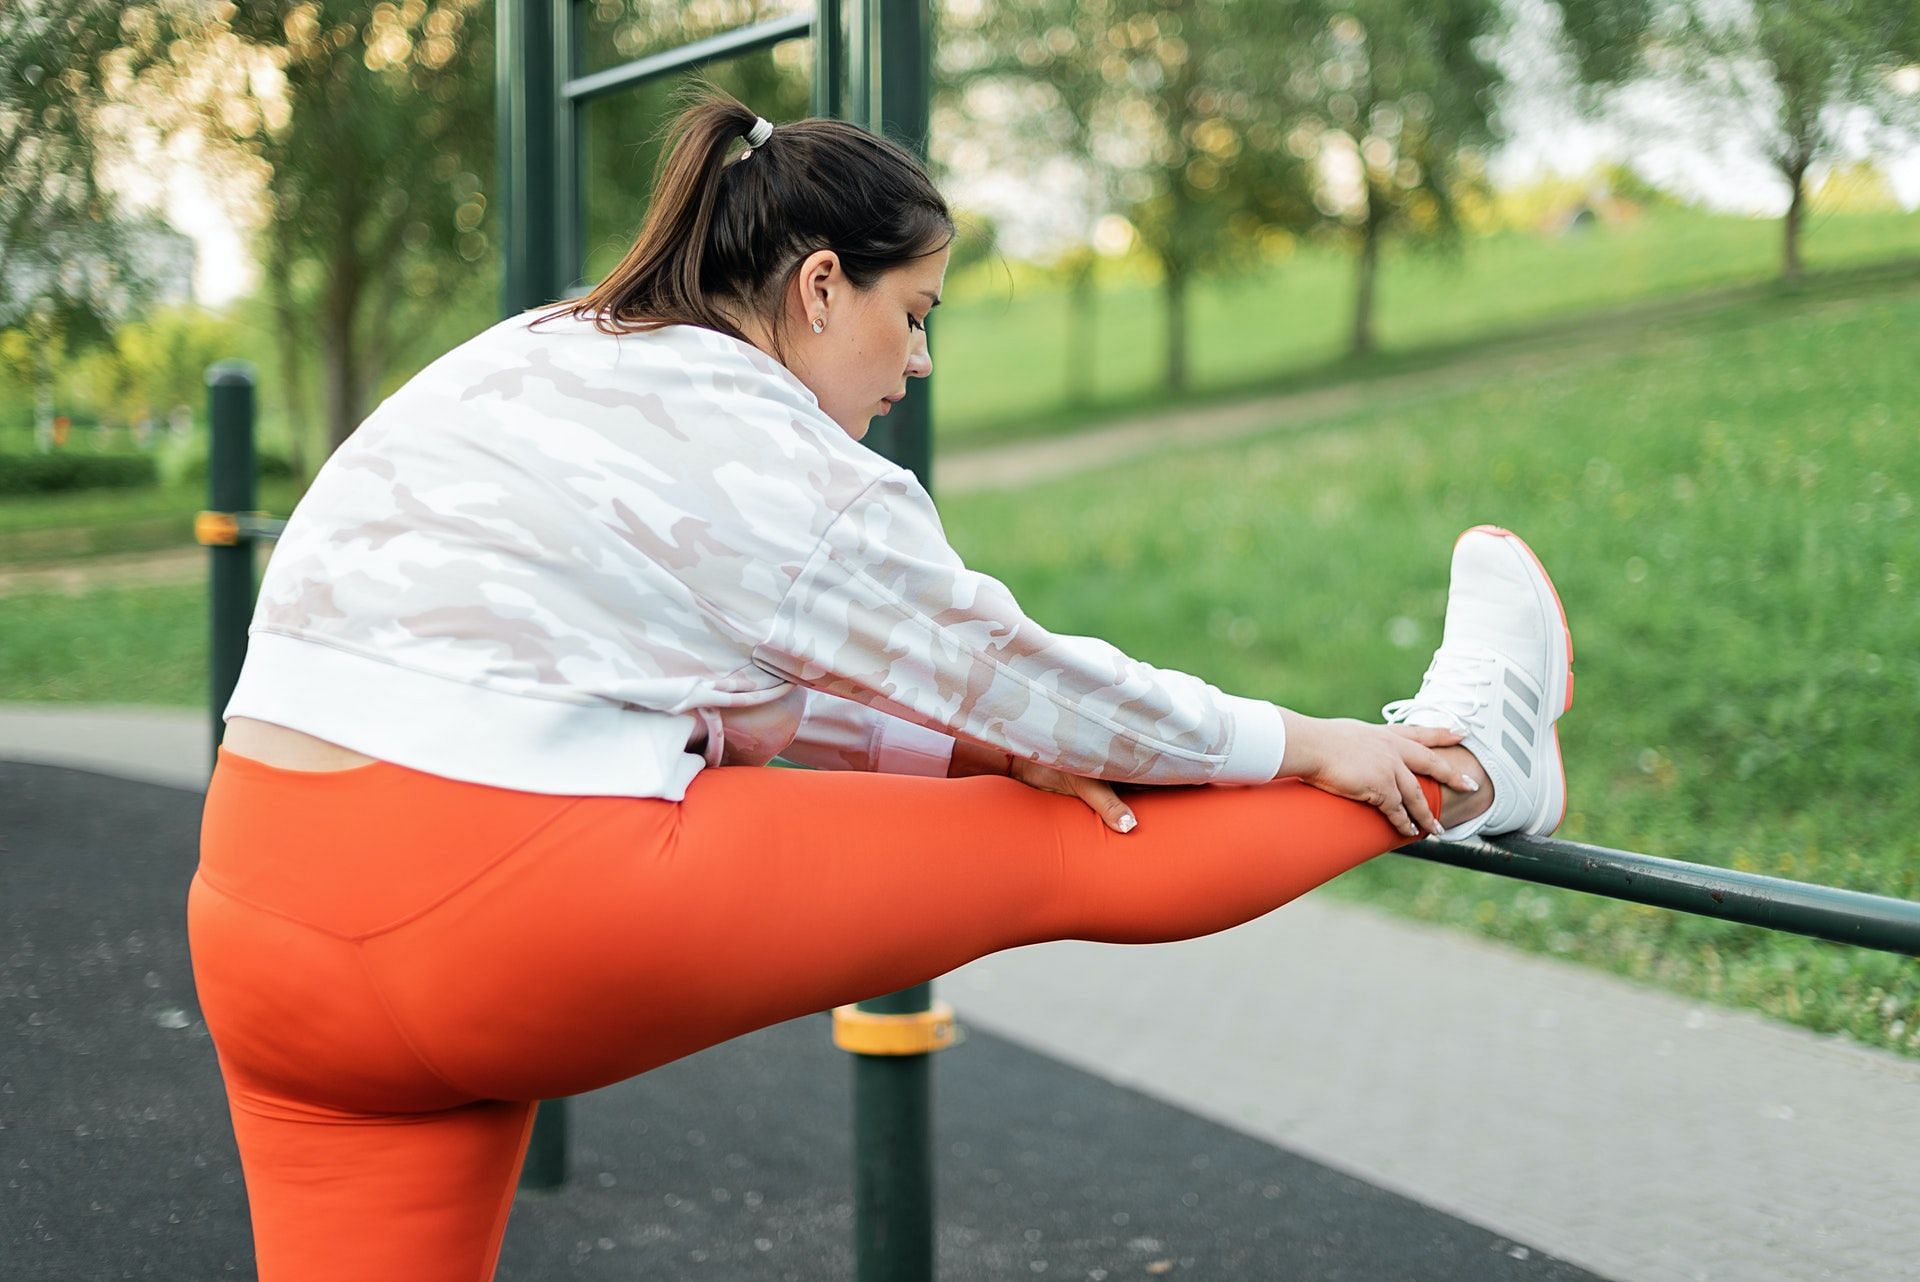 Regular stretching is very important if you have tight leg muscles. (Photo by Mikhail Nilov via pexels)